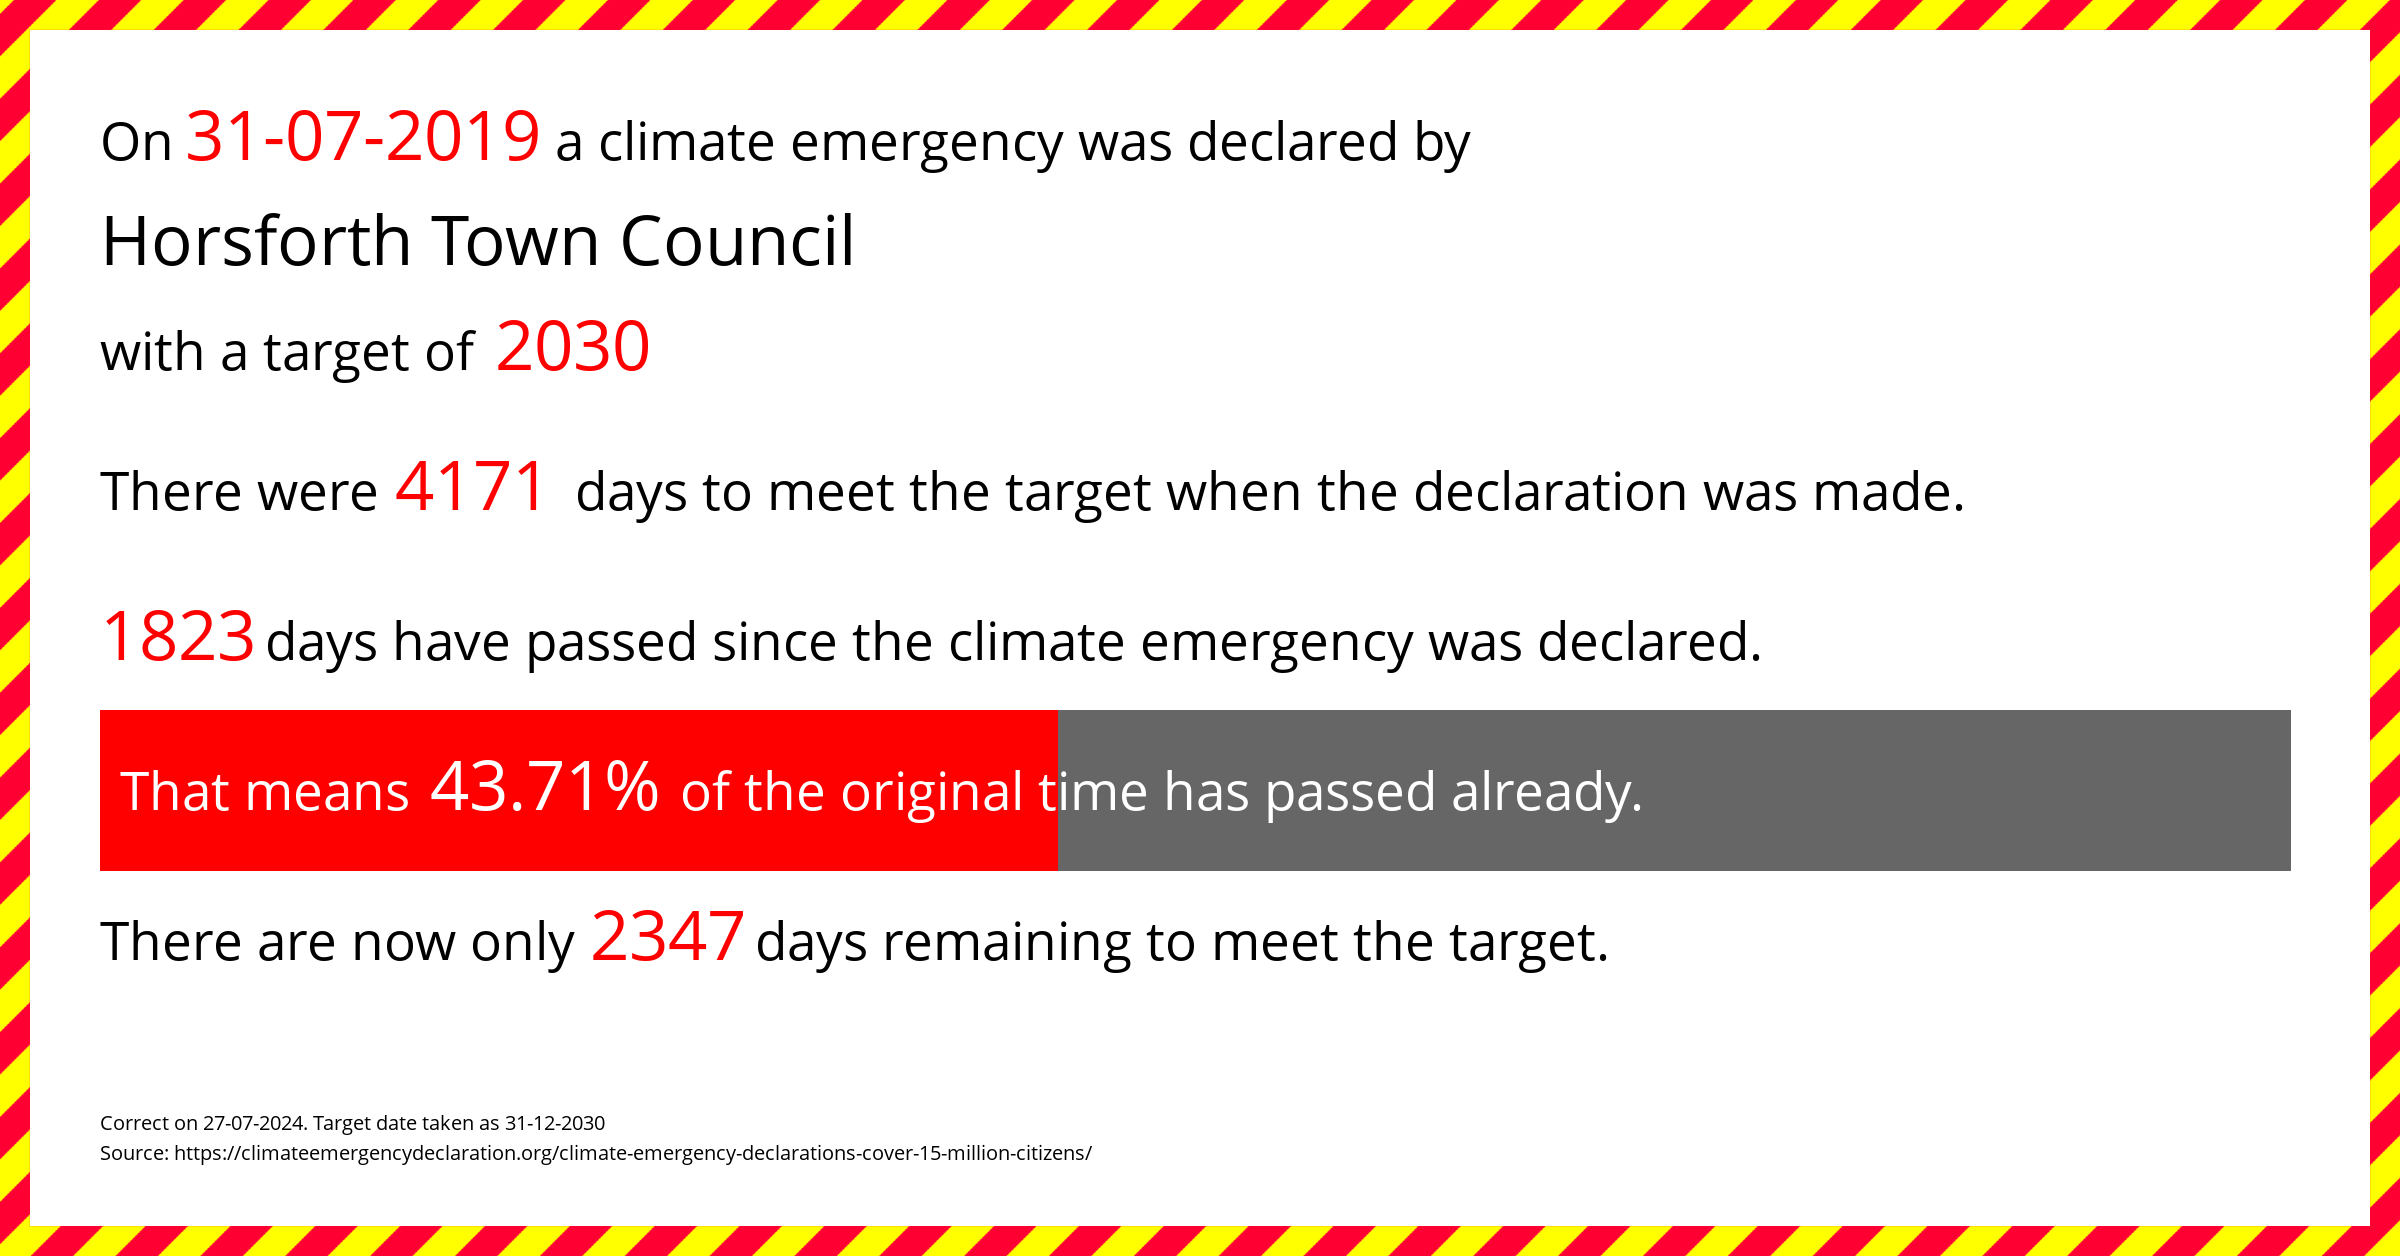 Horsforth Town Council declared a Climate emergency on Wednesday 31st July 2019, with a target of 2030.